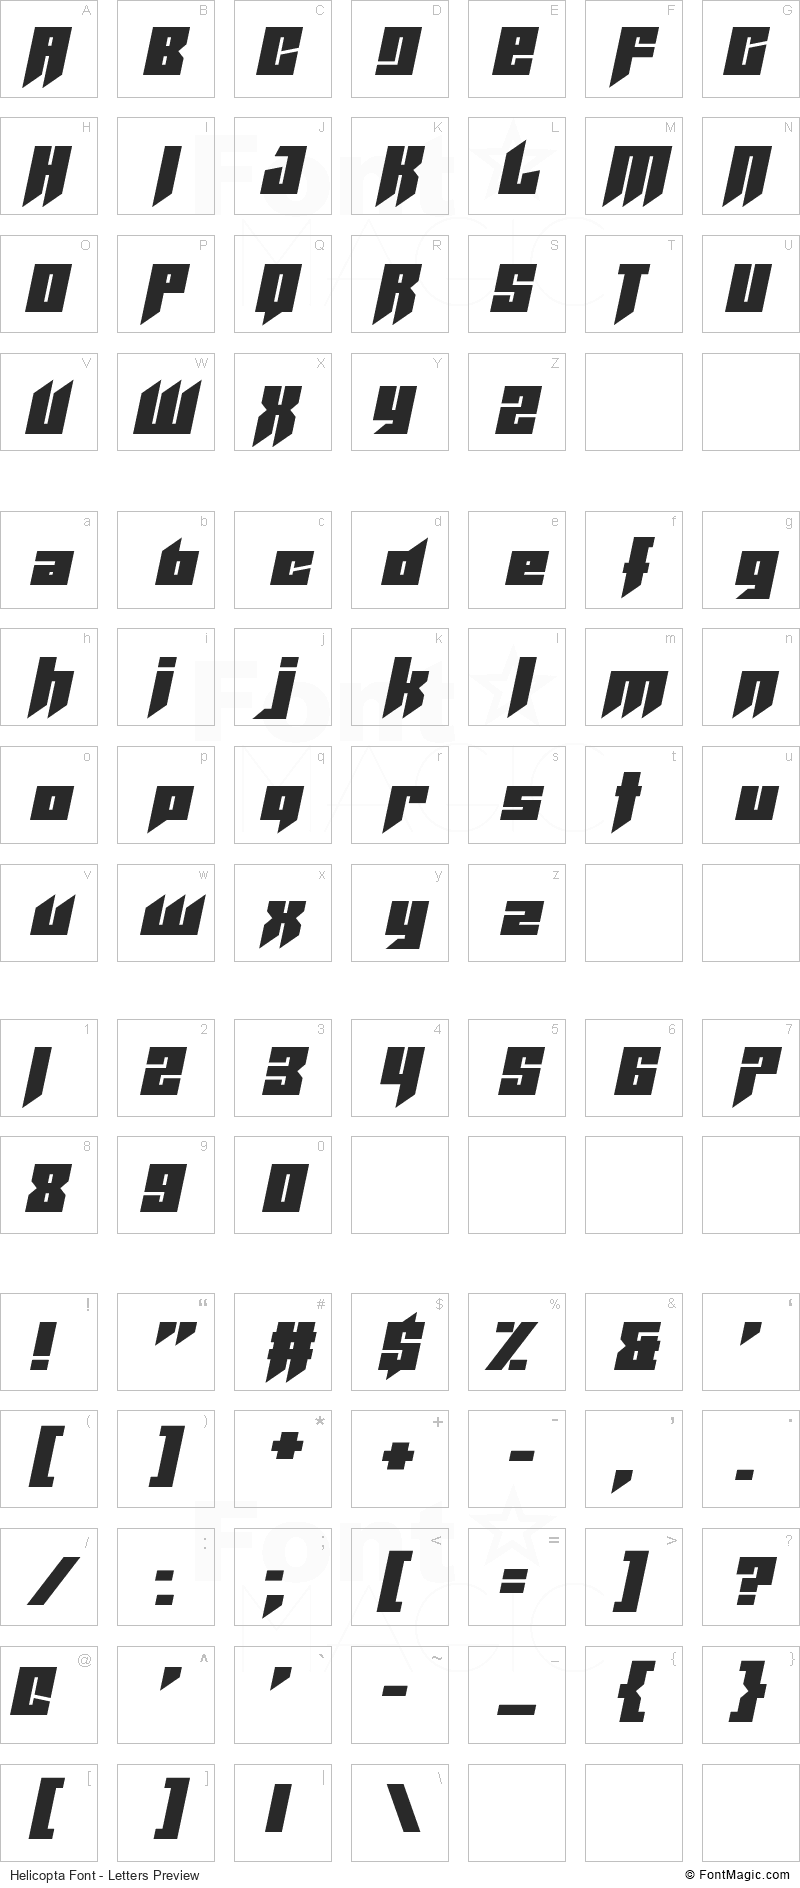 Helicopta Font - All Latters Preview Chart